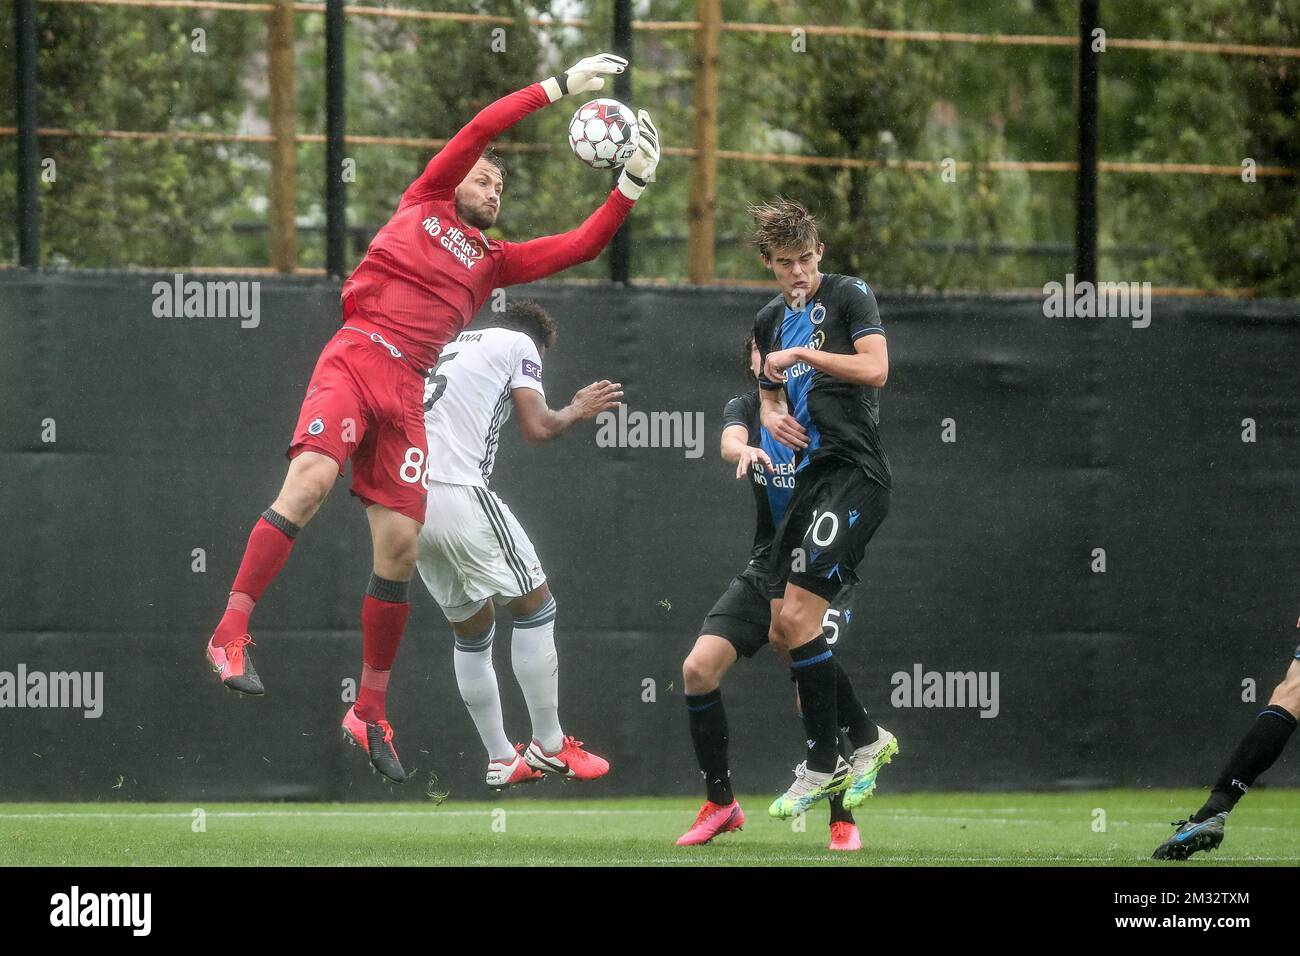 Club's goalkeeper Simon Mignolet, OHL's Pierre Yves Ngawa and Club's Charles De Ketelaere fight for the ball during a friendly game between first league team Club Brugge and 1B team OH Leuven, Saturday 04 July 2020 in Westkapelle, in preparation of the upcoming 2020-2021 Jupiler Pro League season. BELGA PHOTO BRUNO FAHY Stock Photo